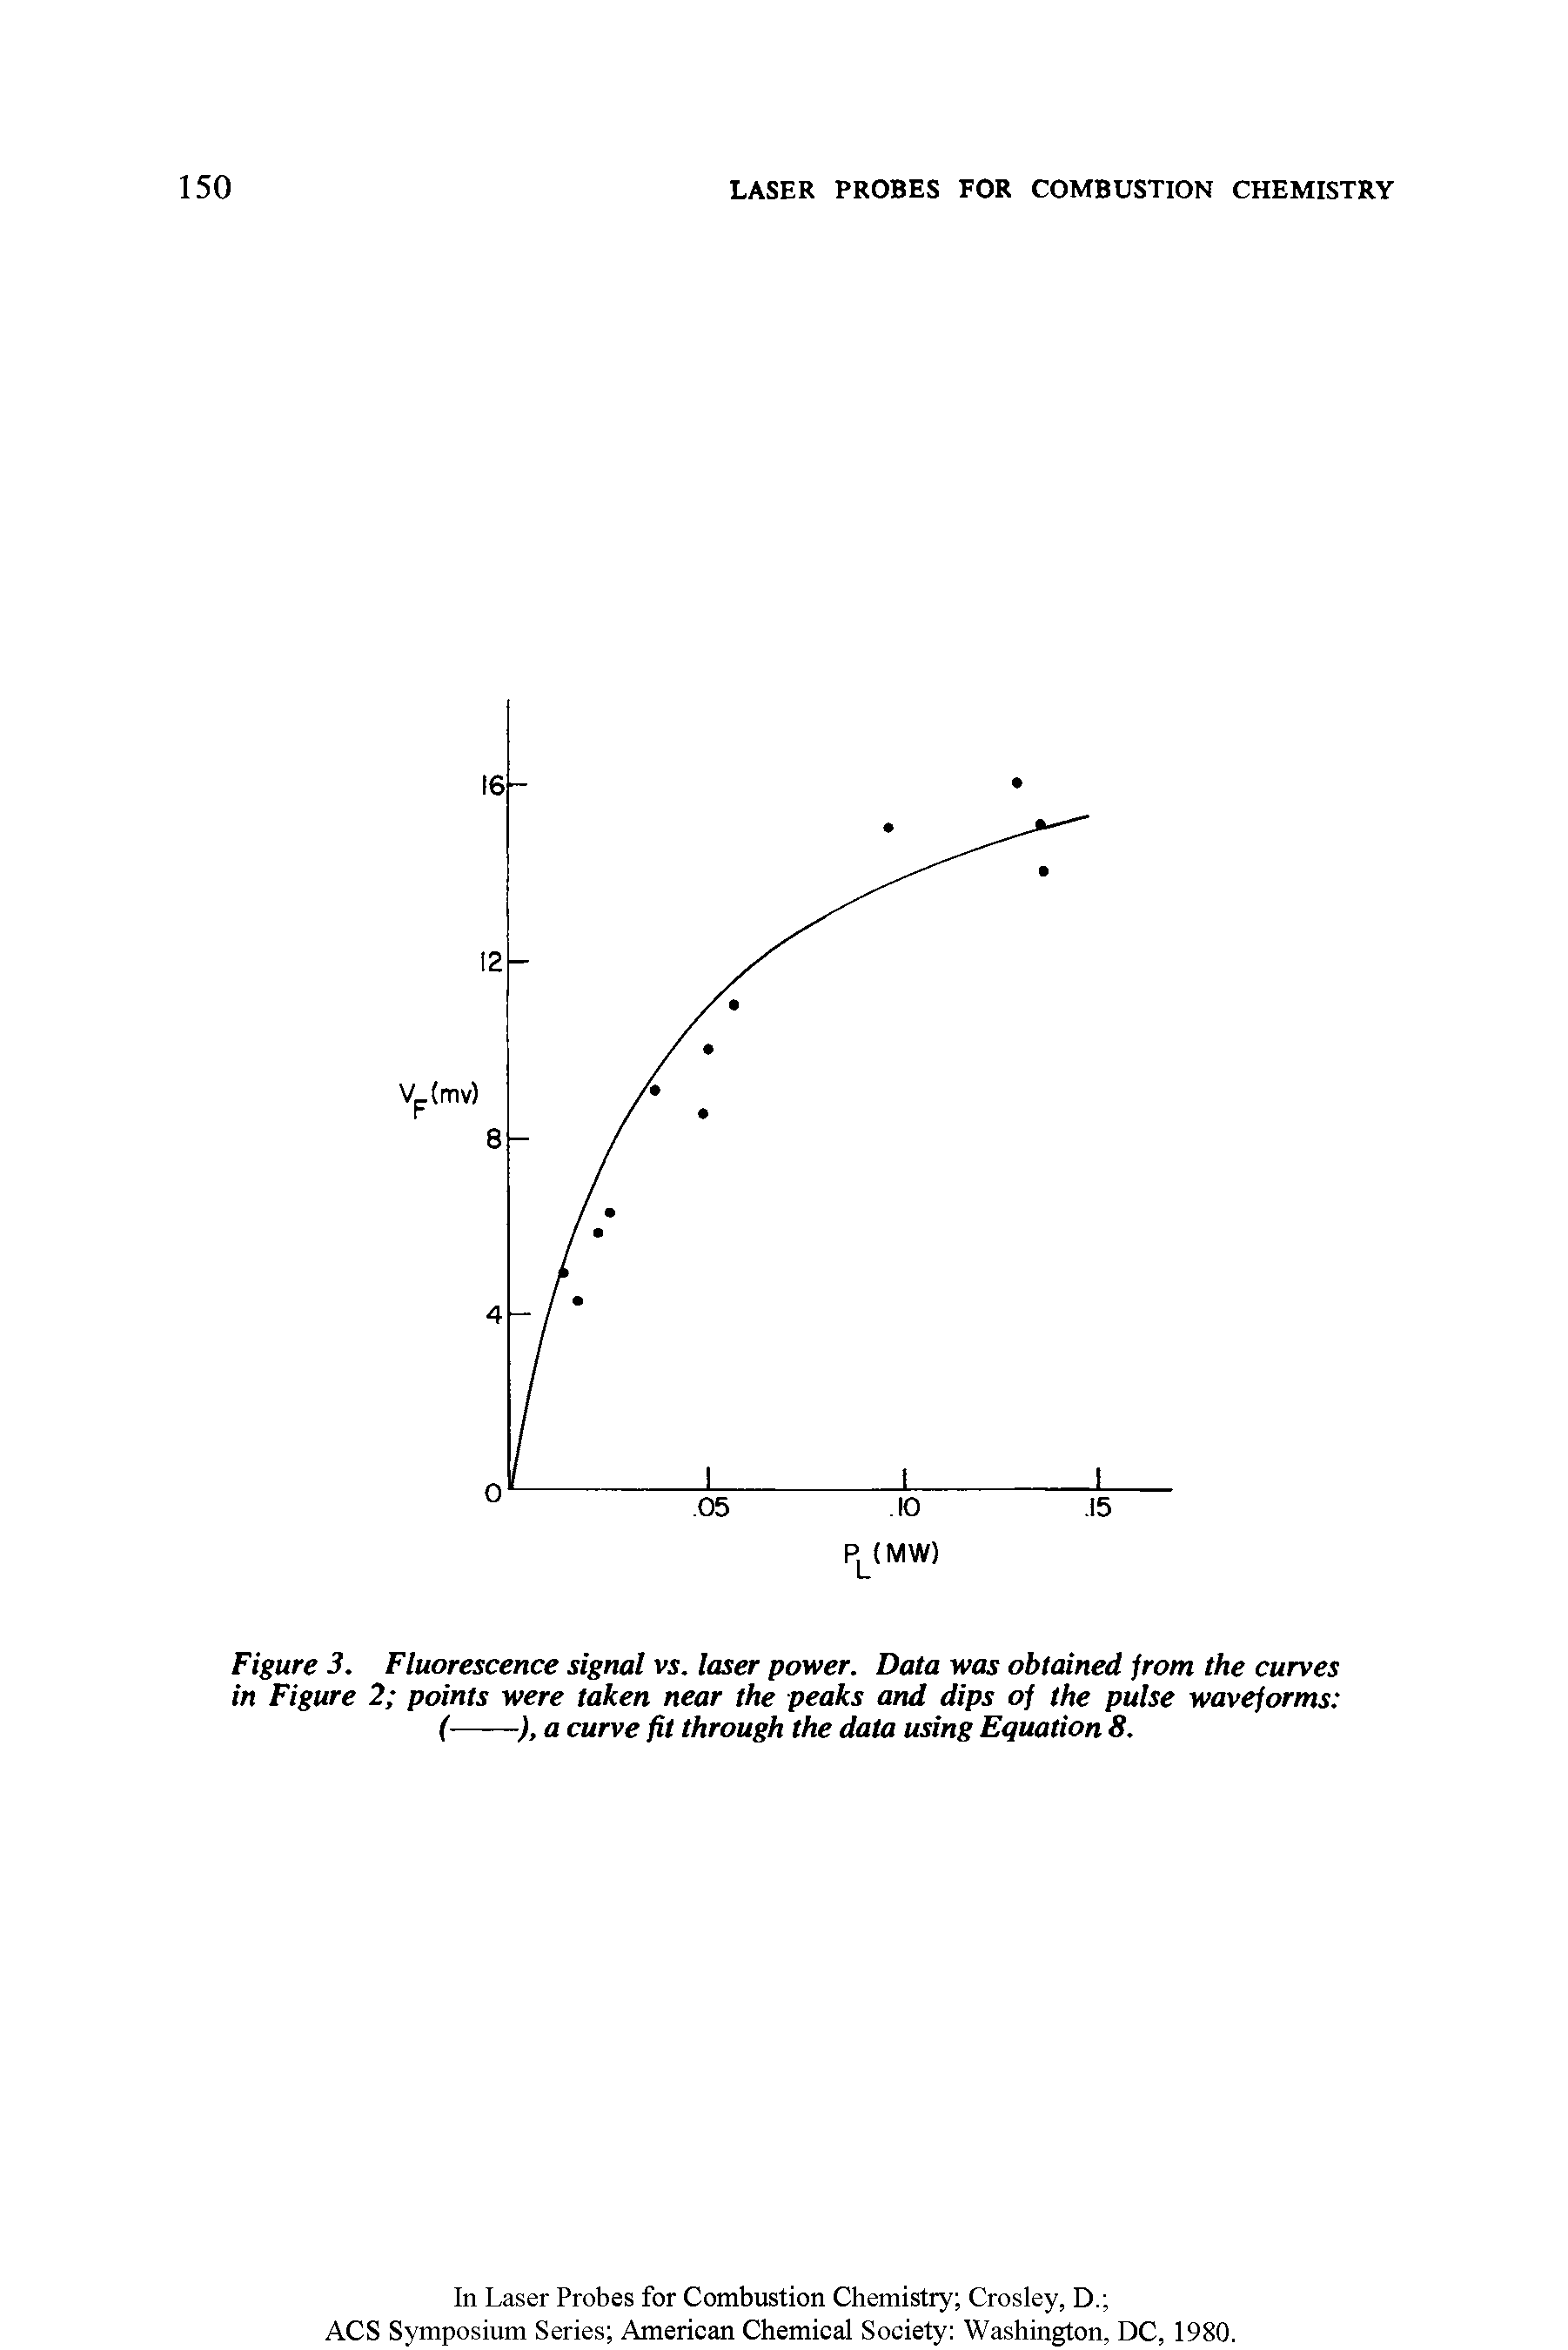 Figure 3. Fluorescence signal vs. laser power. Data was obtained jrom the curves in Figure 2 points were taken near the peaks and dips of the pulse waveforms (-------------------), a curve fit through the data using Equation 8.